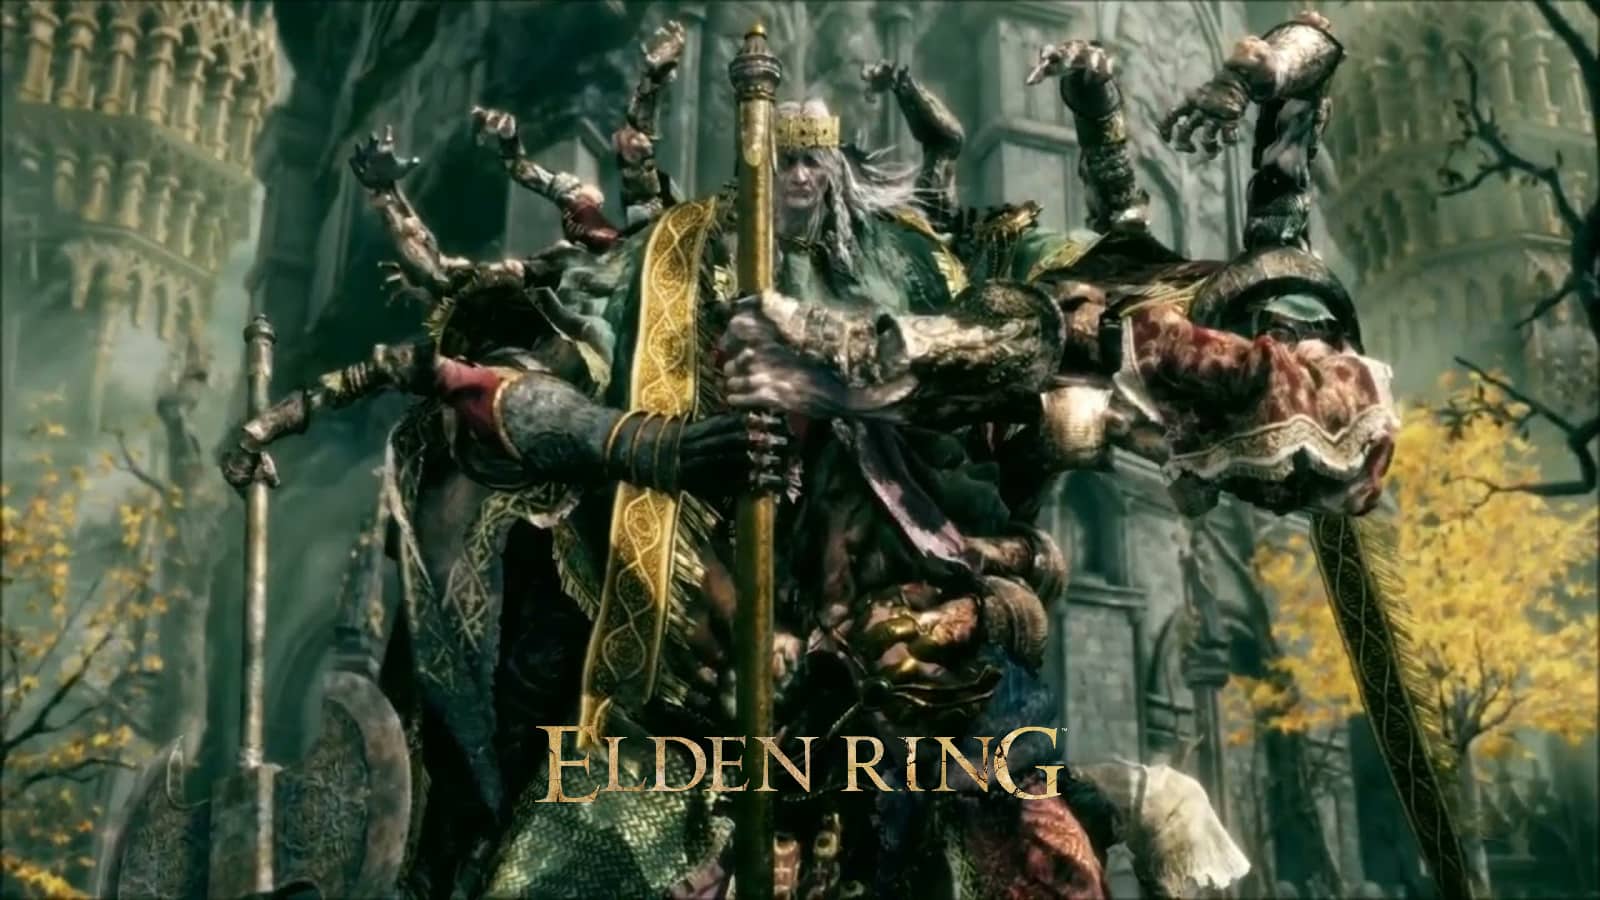 A Breakdown of Elden Ring [New Game by From Software] ▻ E3 2019